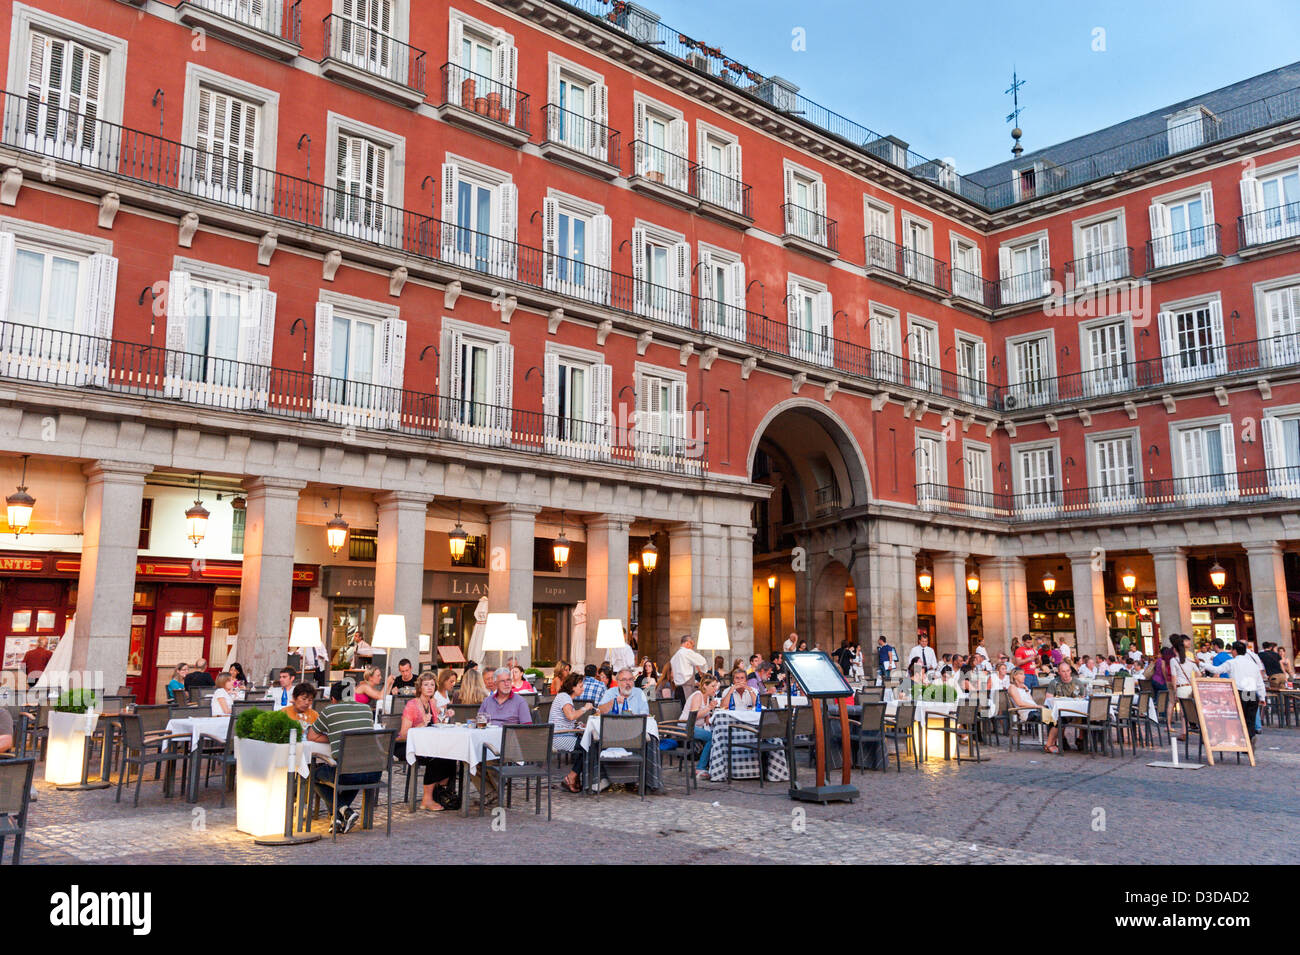 Early evening dining at one of the restaurants in the Plaza Mayor, Madrid, Spain Stock Photo